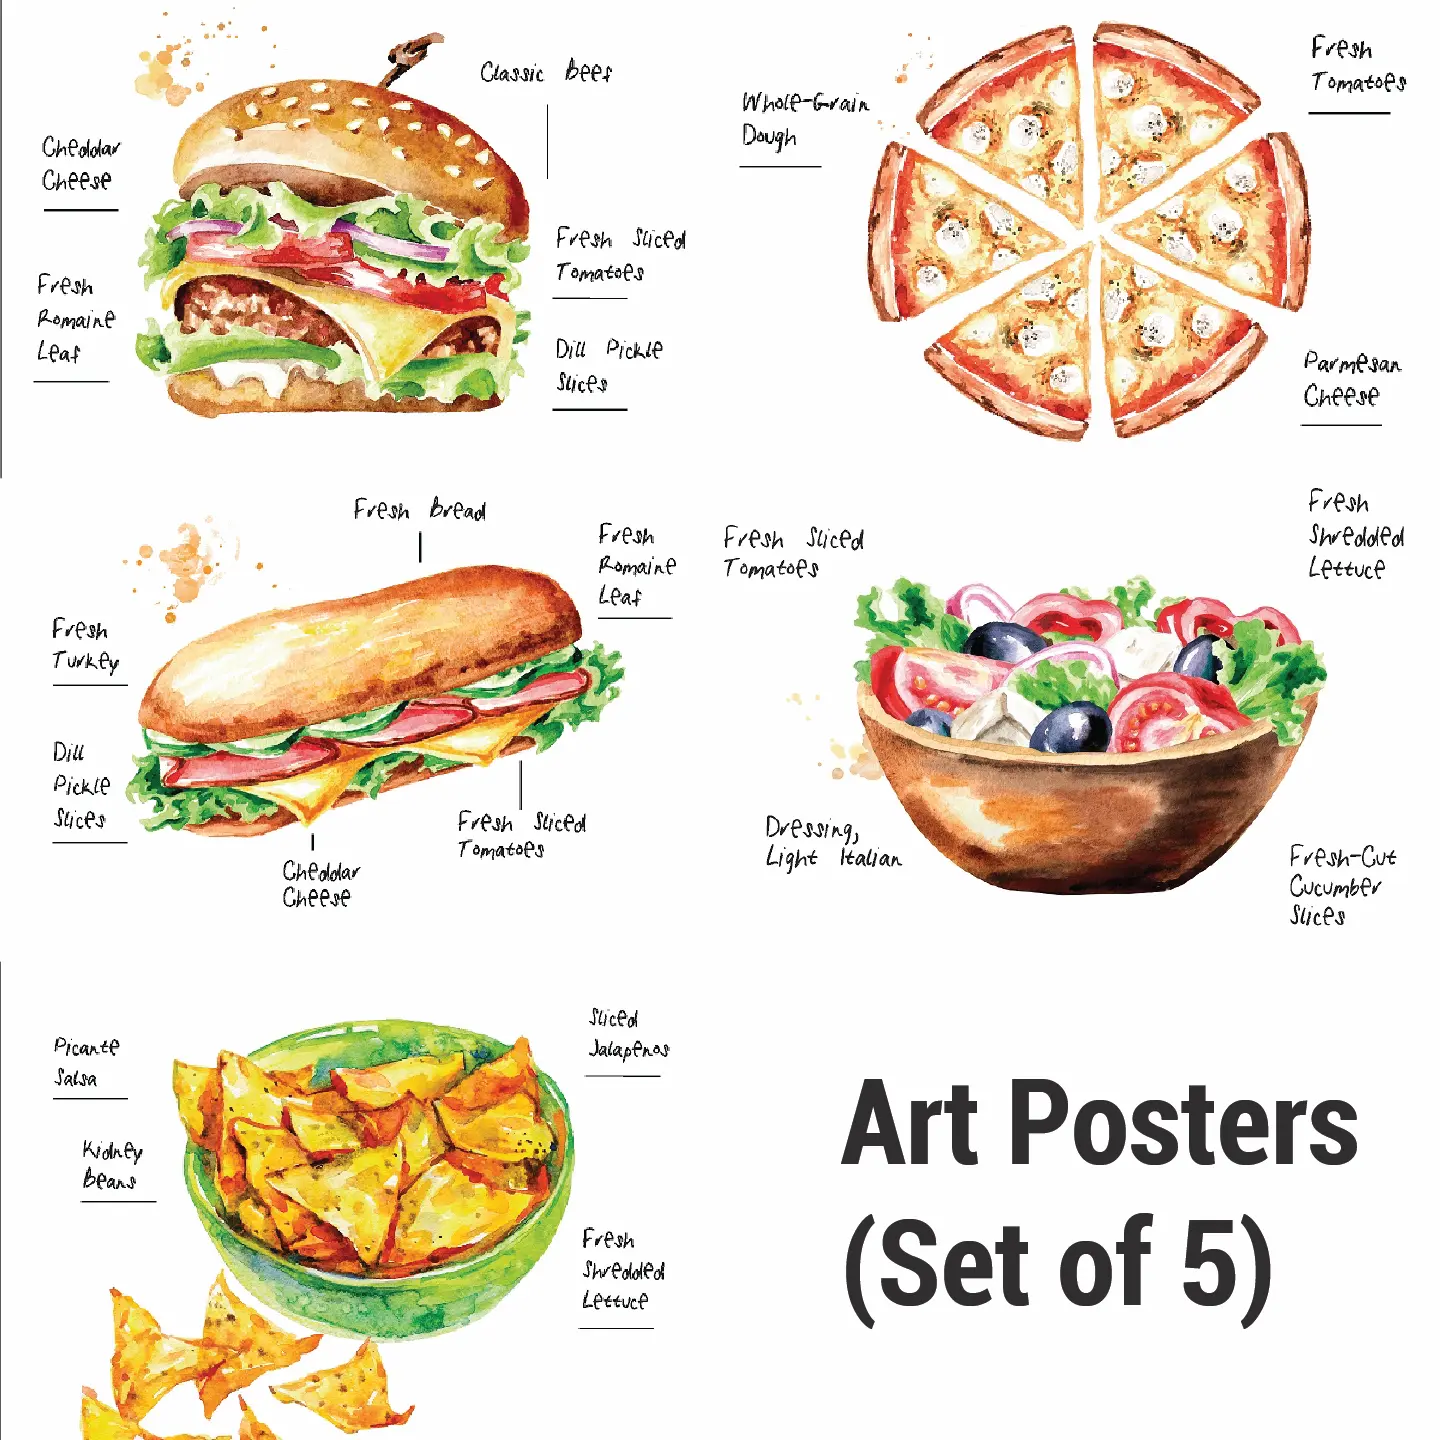 Art Posters ( Set of 5 ) “Grilled Cheesburger” “Cheese Pizza” “Fresh Salad” “Turkey Sub” “Cheesy Nachos”